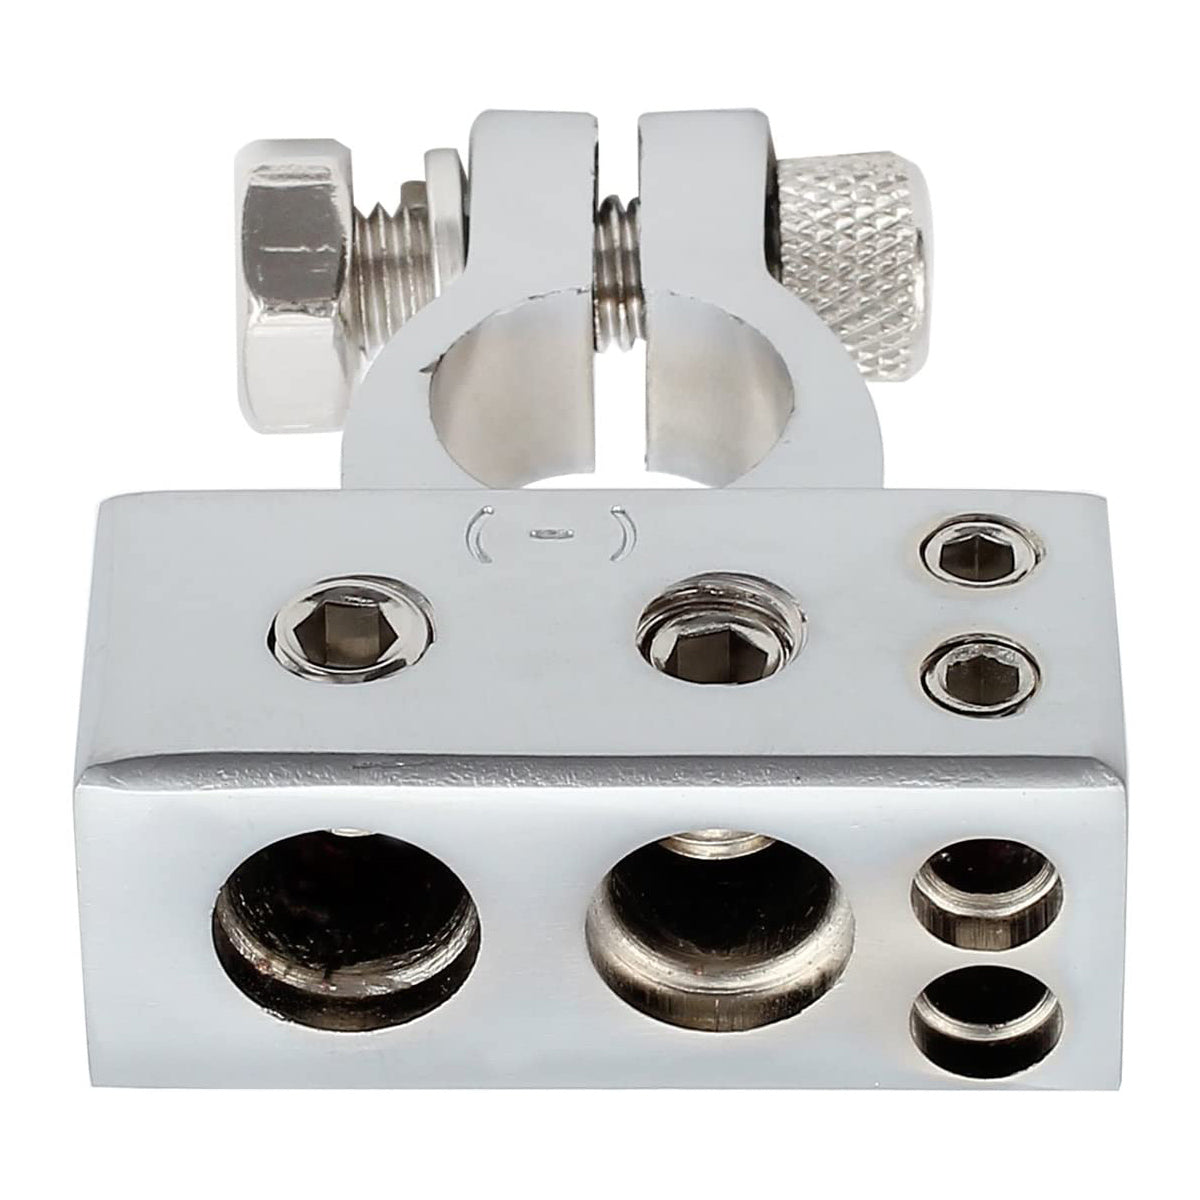 eSynic 4/8 Gauge AWG Car Battery Terminals -Silver